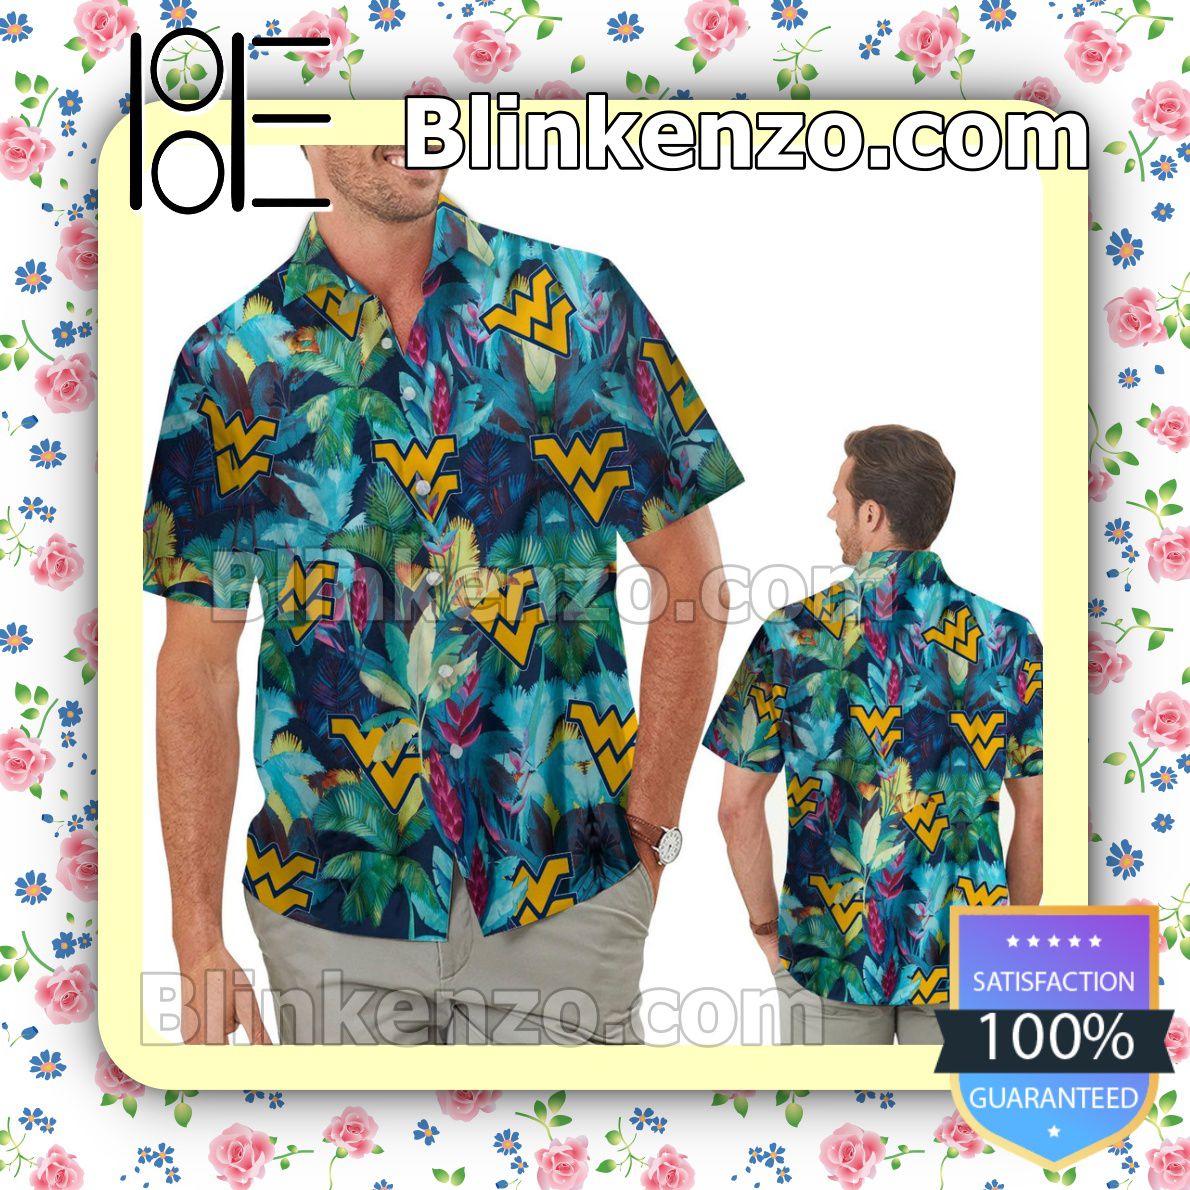 West Virginia Mountaineers Floral Tropical Mens Shirt, Swim Trunk